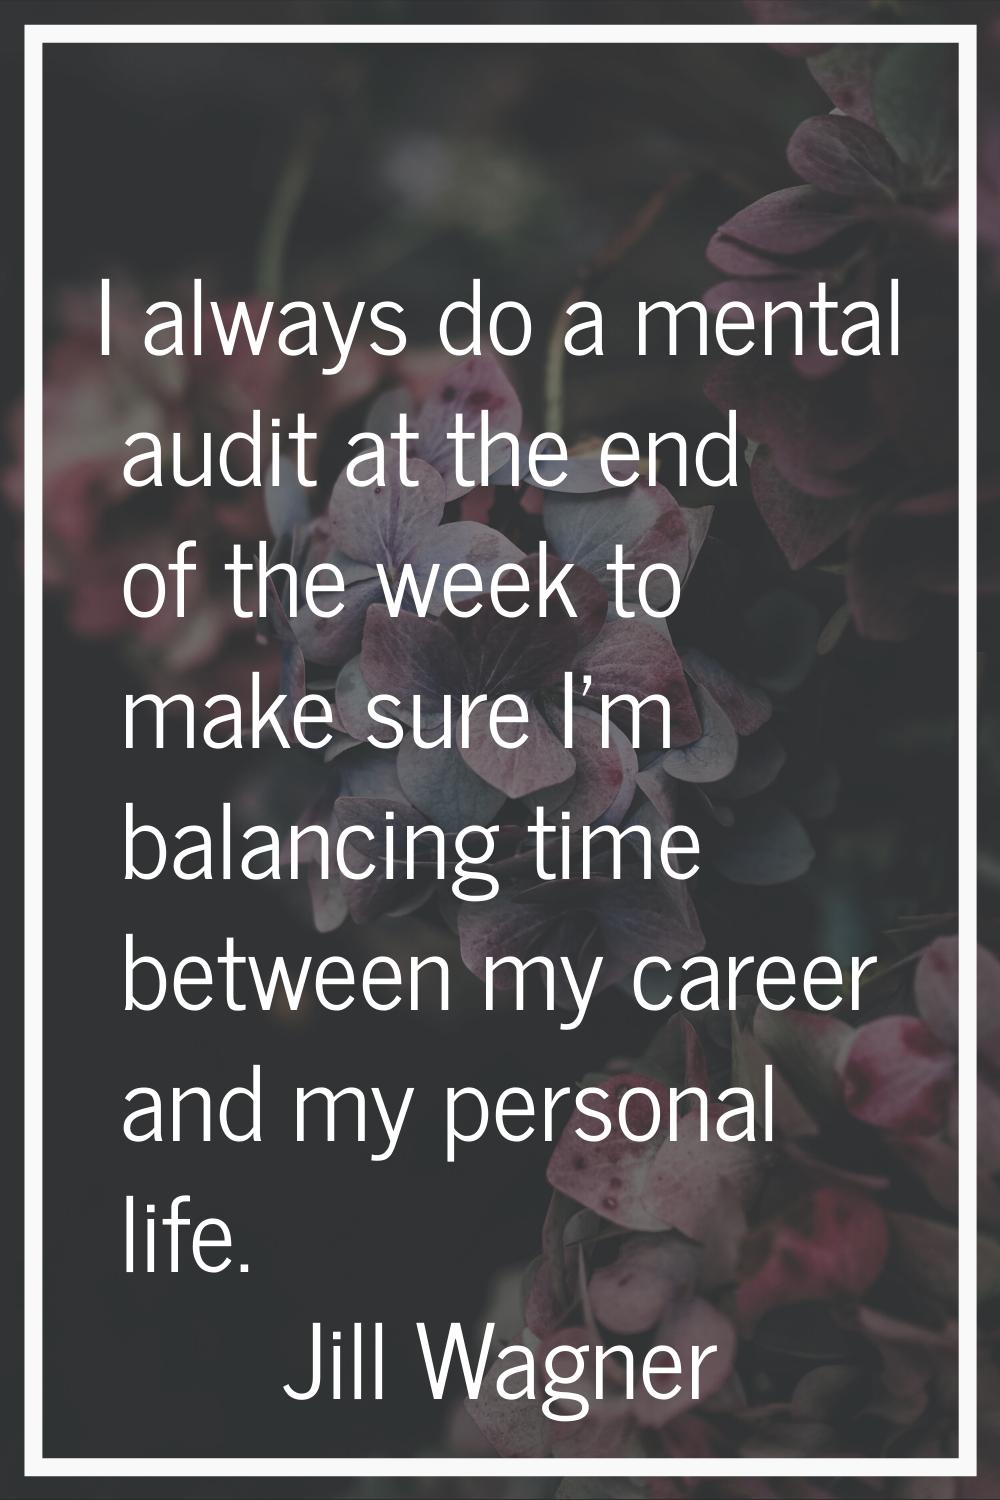 I always do a mental audit at the end of the week to make sure I'm balancing time between my career